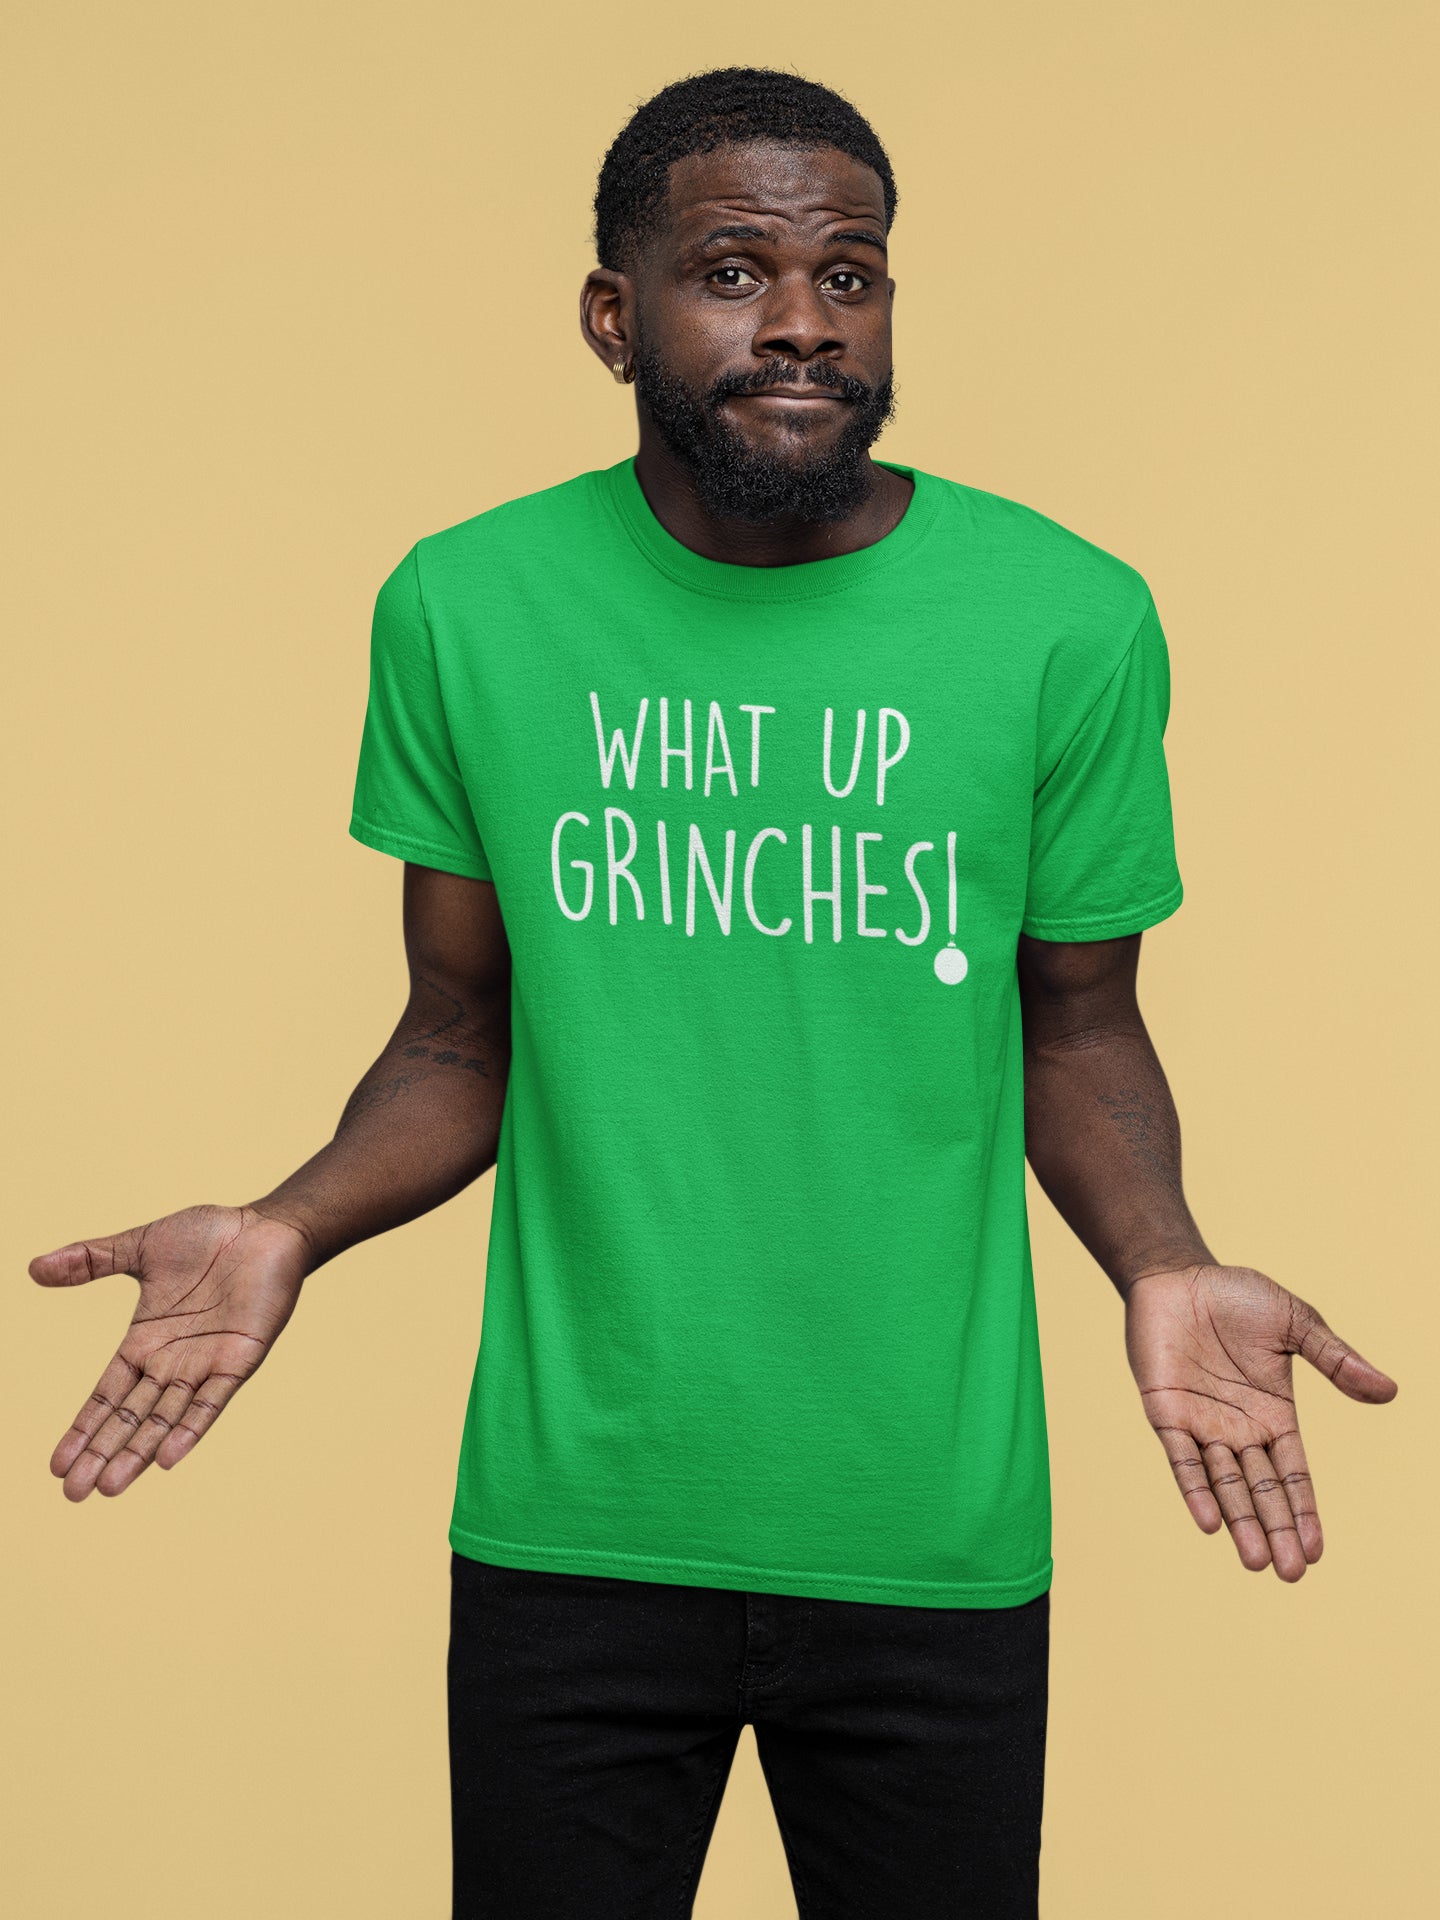 Whats Up Grinches Tshirt - Donkey Tees